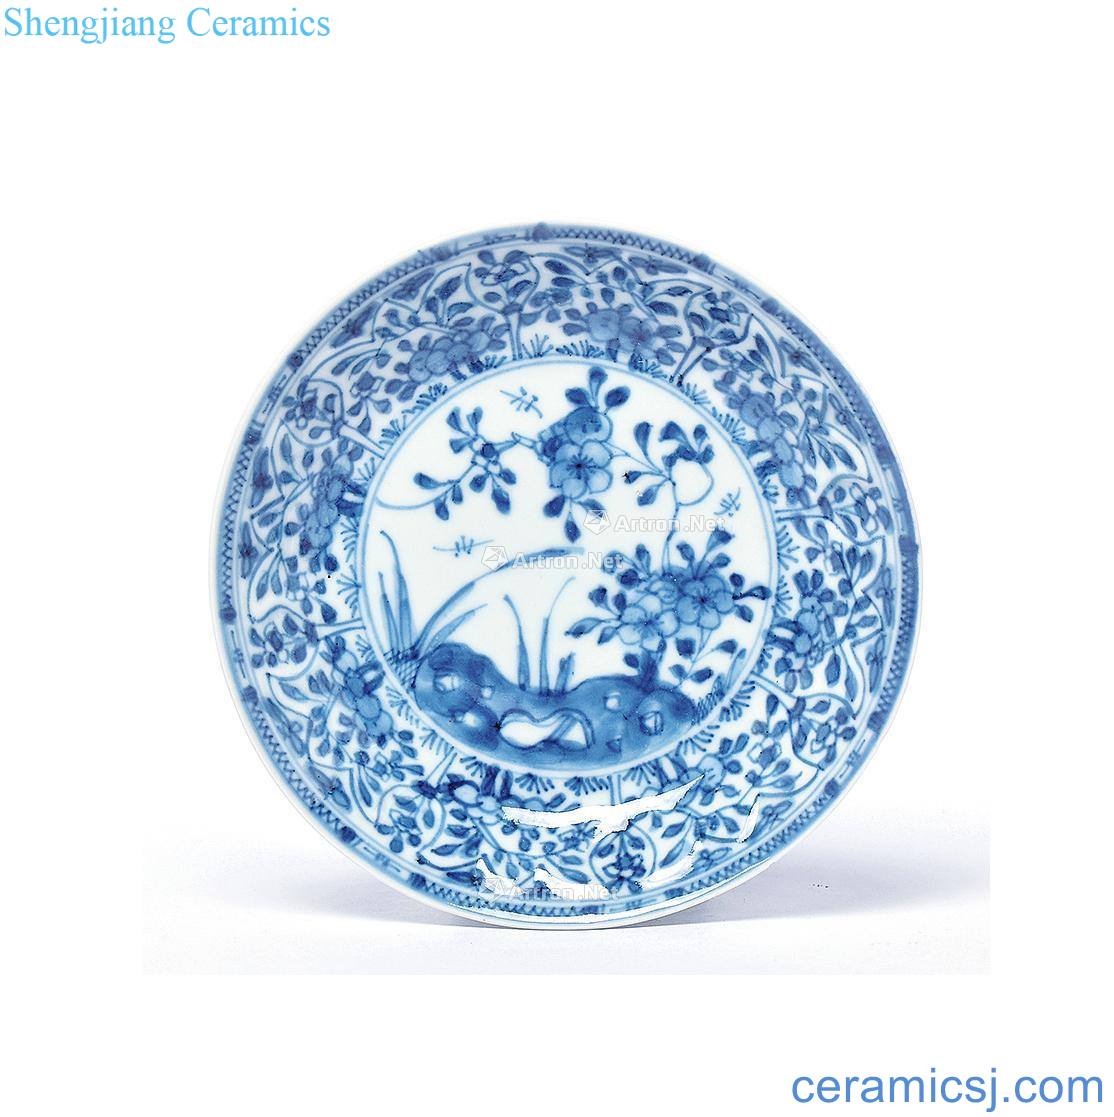 Qing dynasty Blue and white flower pattern plate